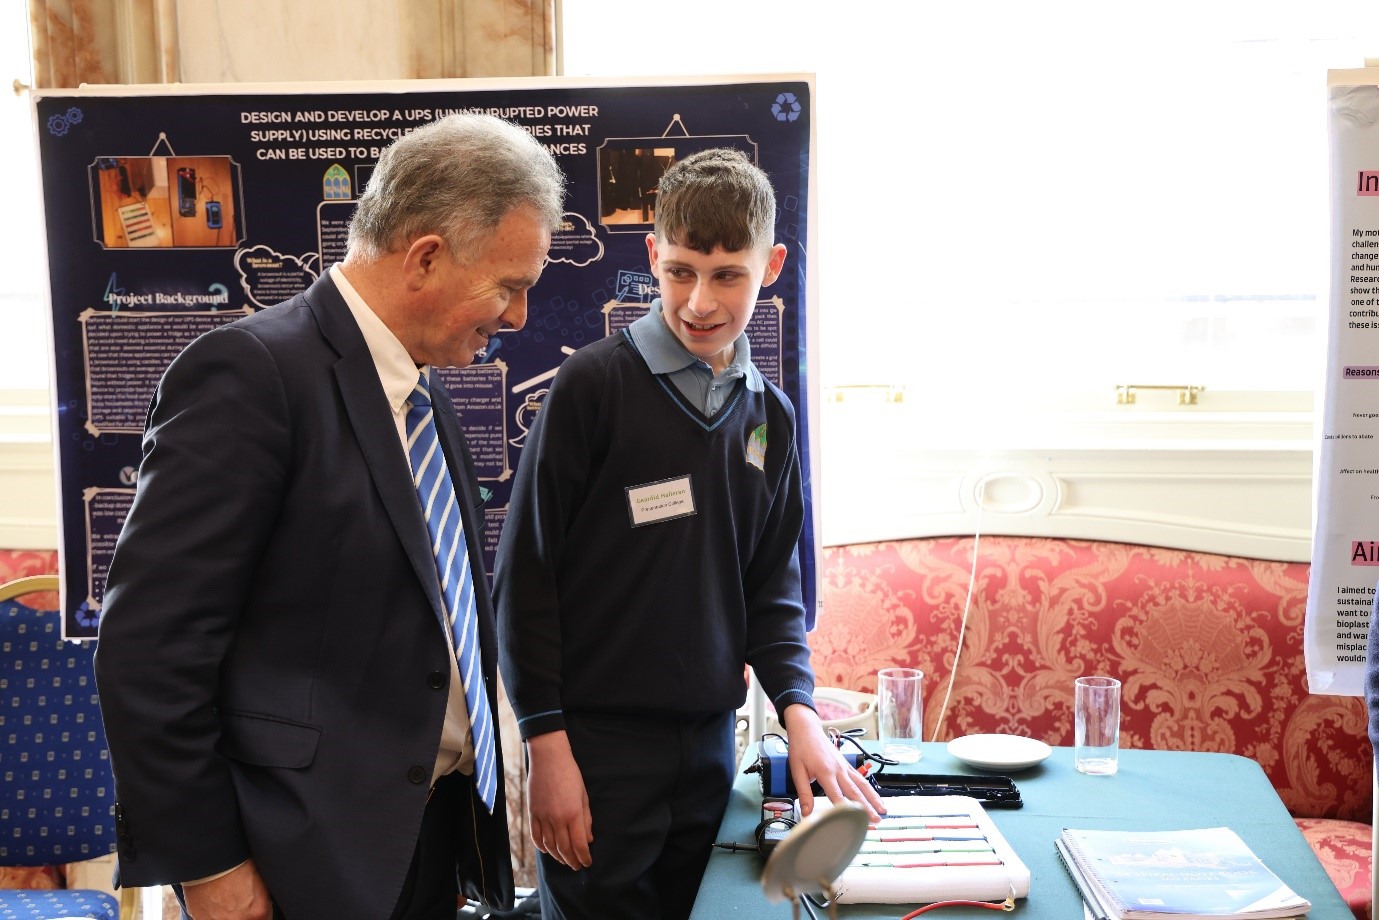 Second year student from Presentation College Galway, Gearóid Halleran discusses his project with Minister Fleming